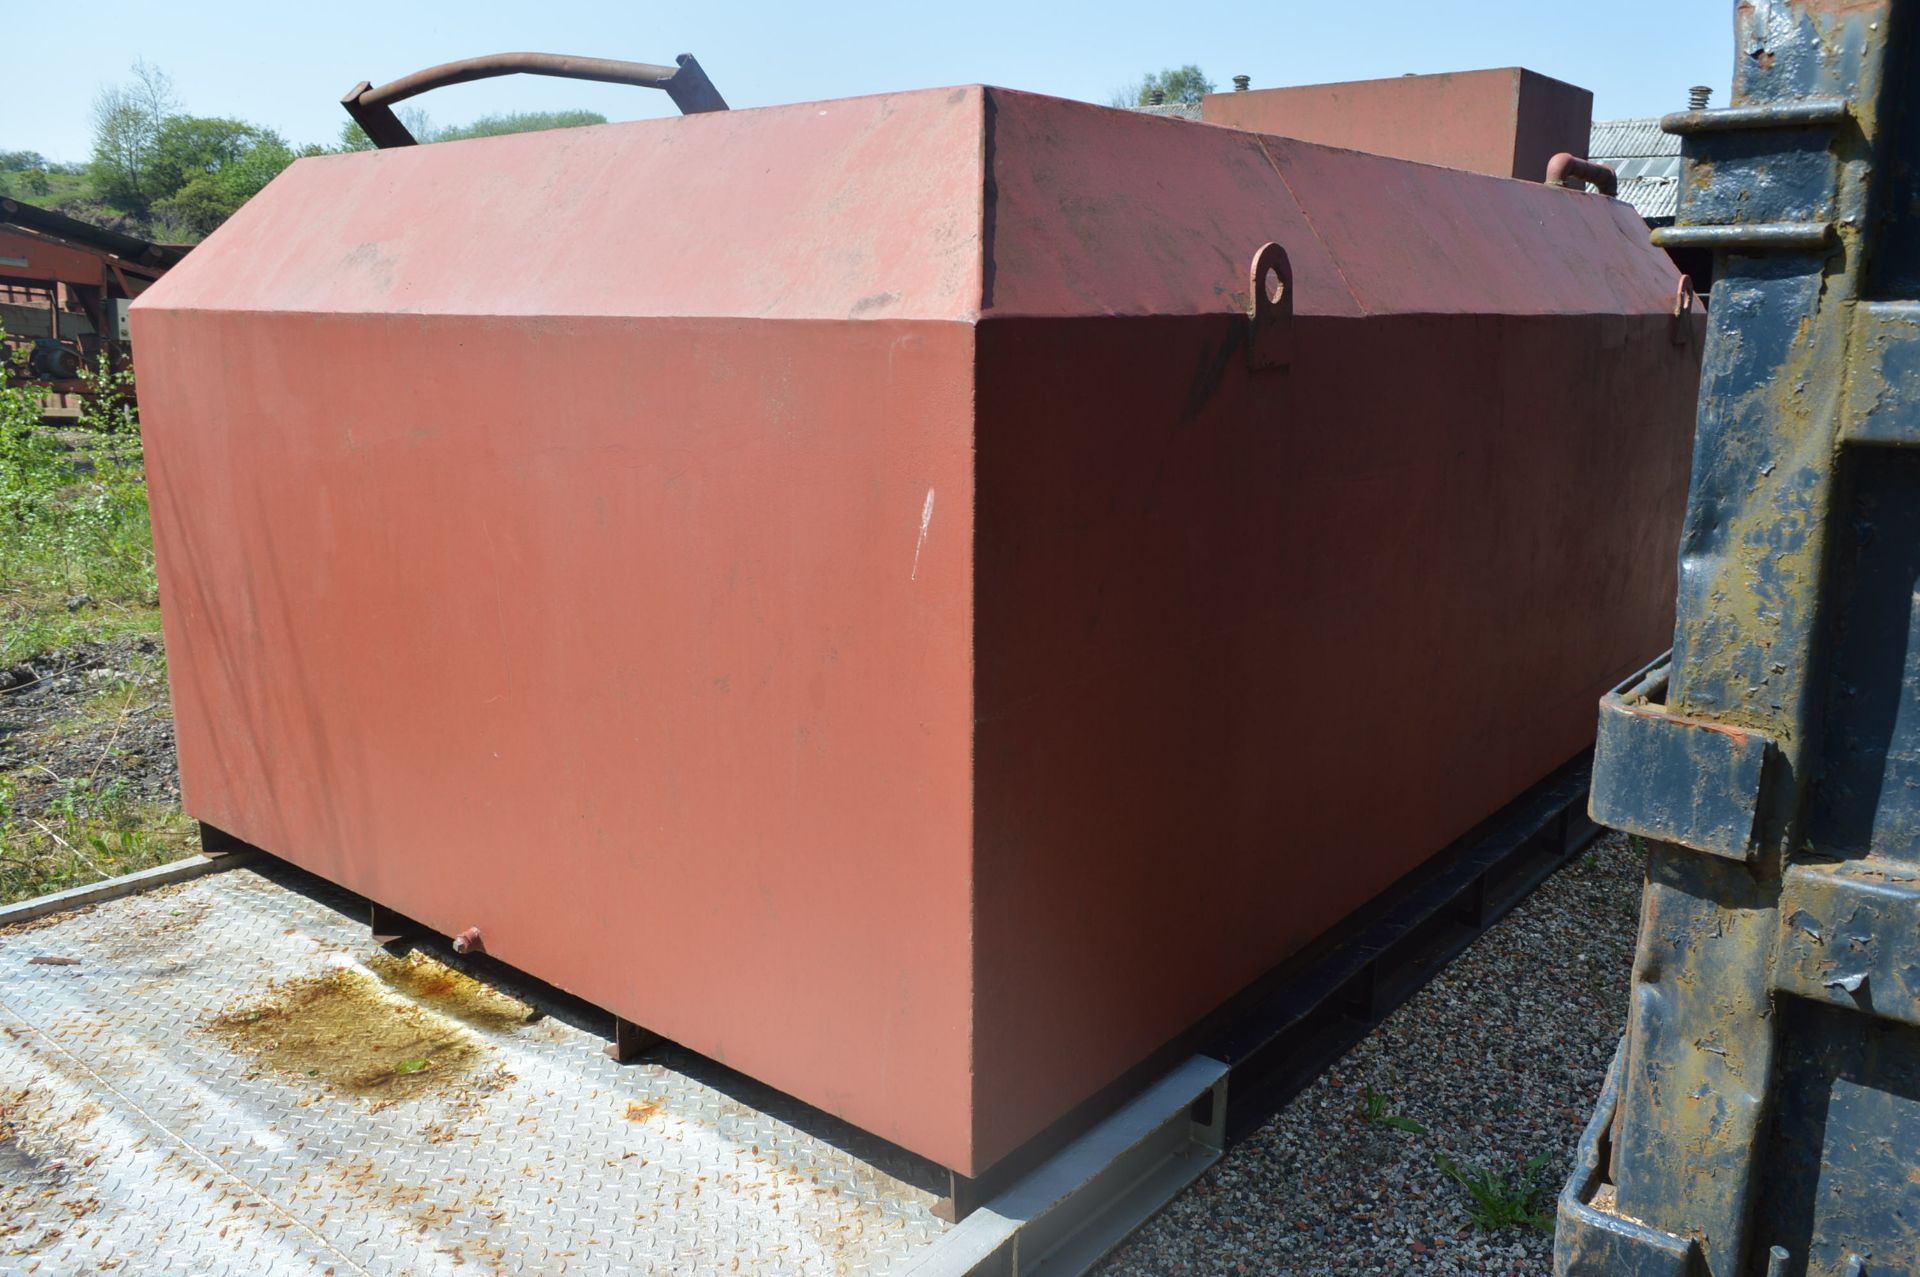 9000 litre BUNDED FUEL OIL STORAGE TANK, approx. 4.4m x 2.5m x 2m high overall, with Fueltek fuel - Image 2 of 4